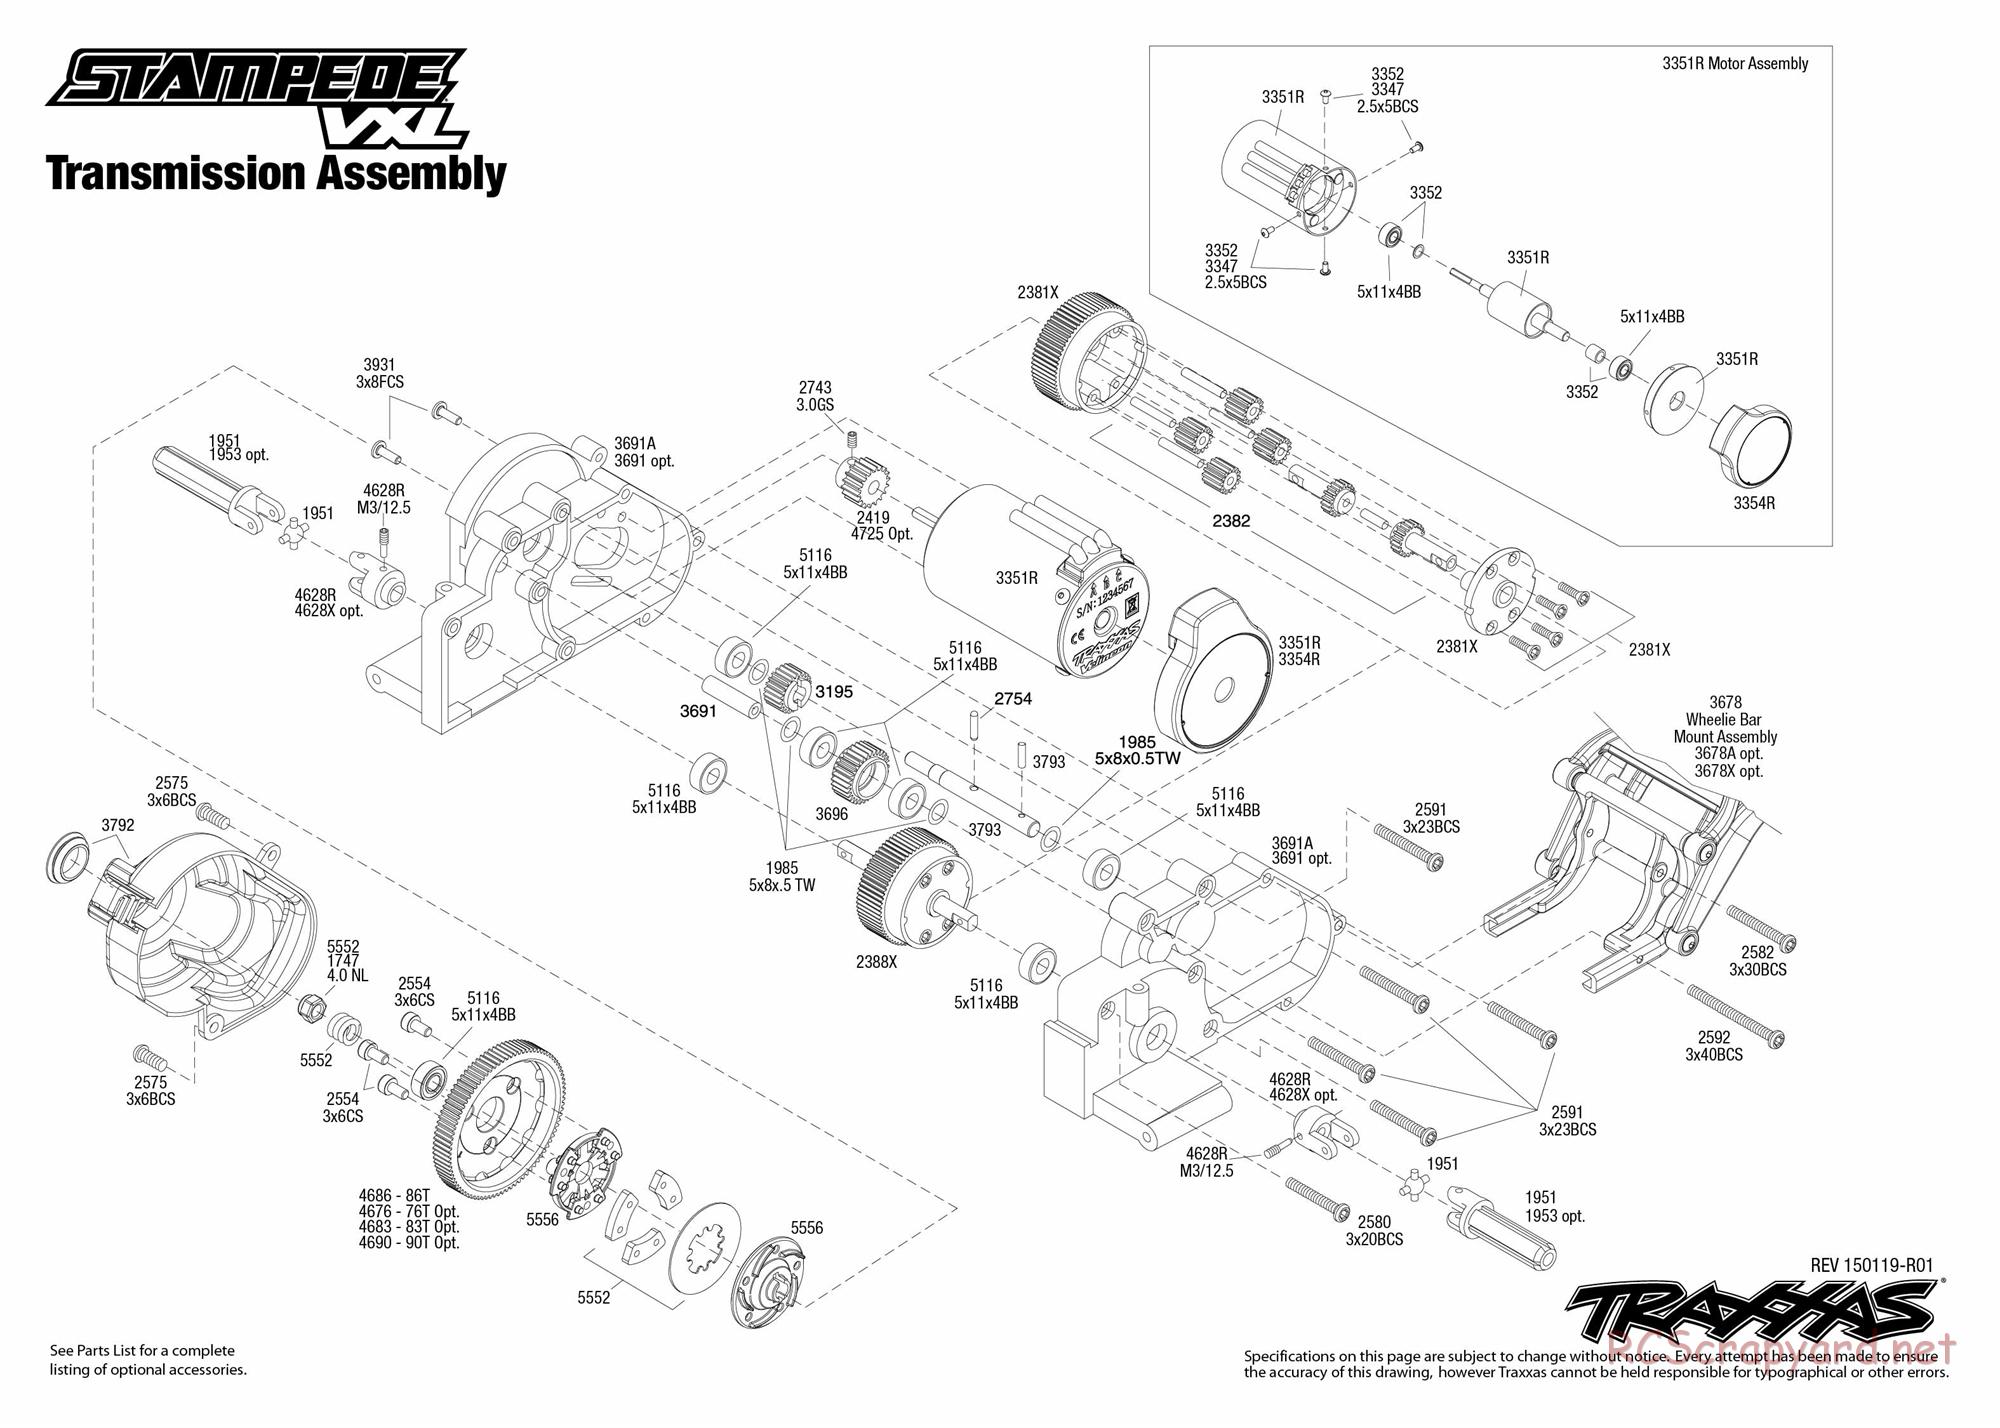 Traxxas - Stampede VXL - Exploded Views - Page 4